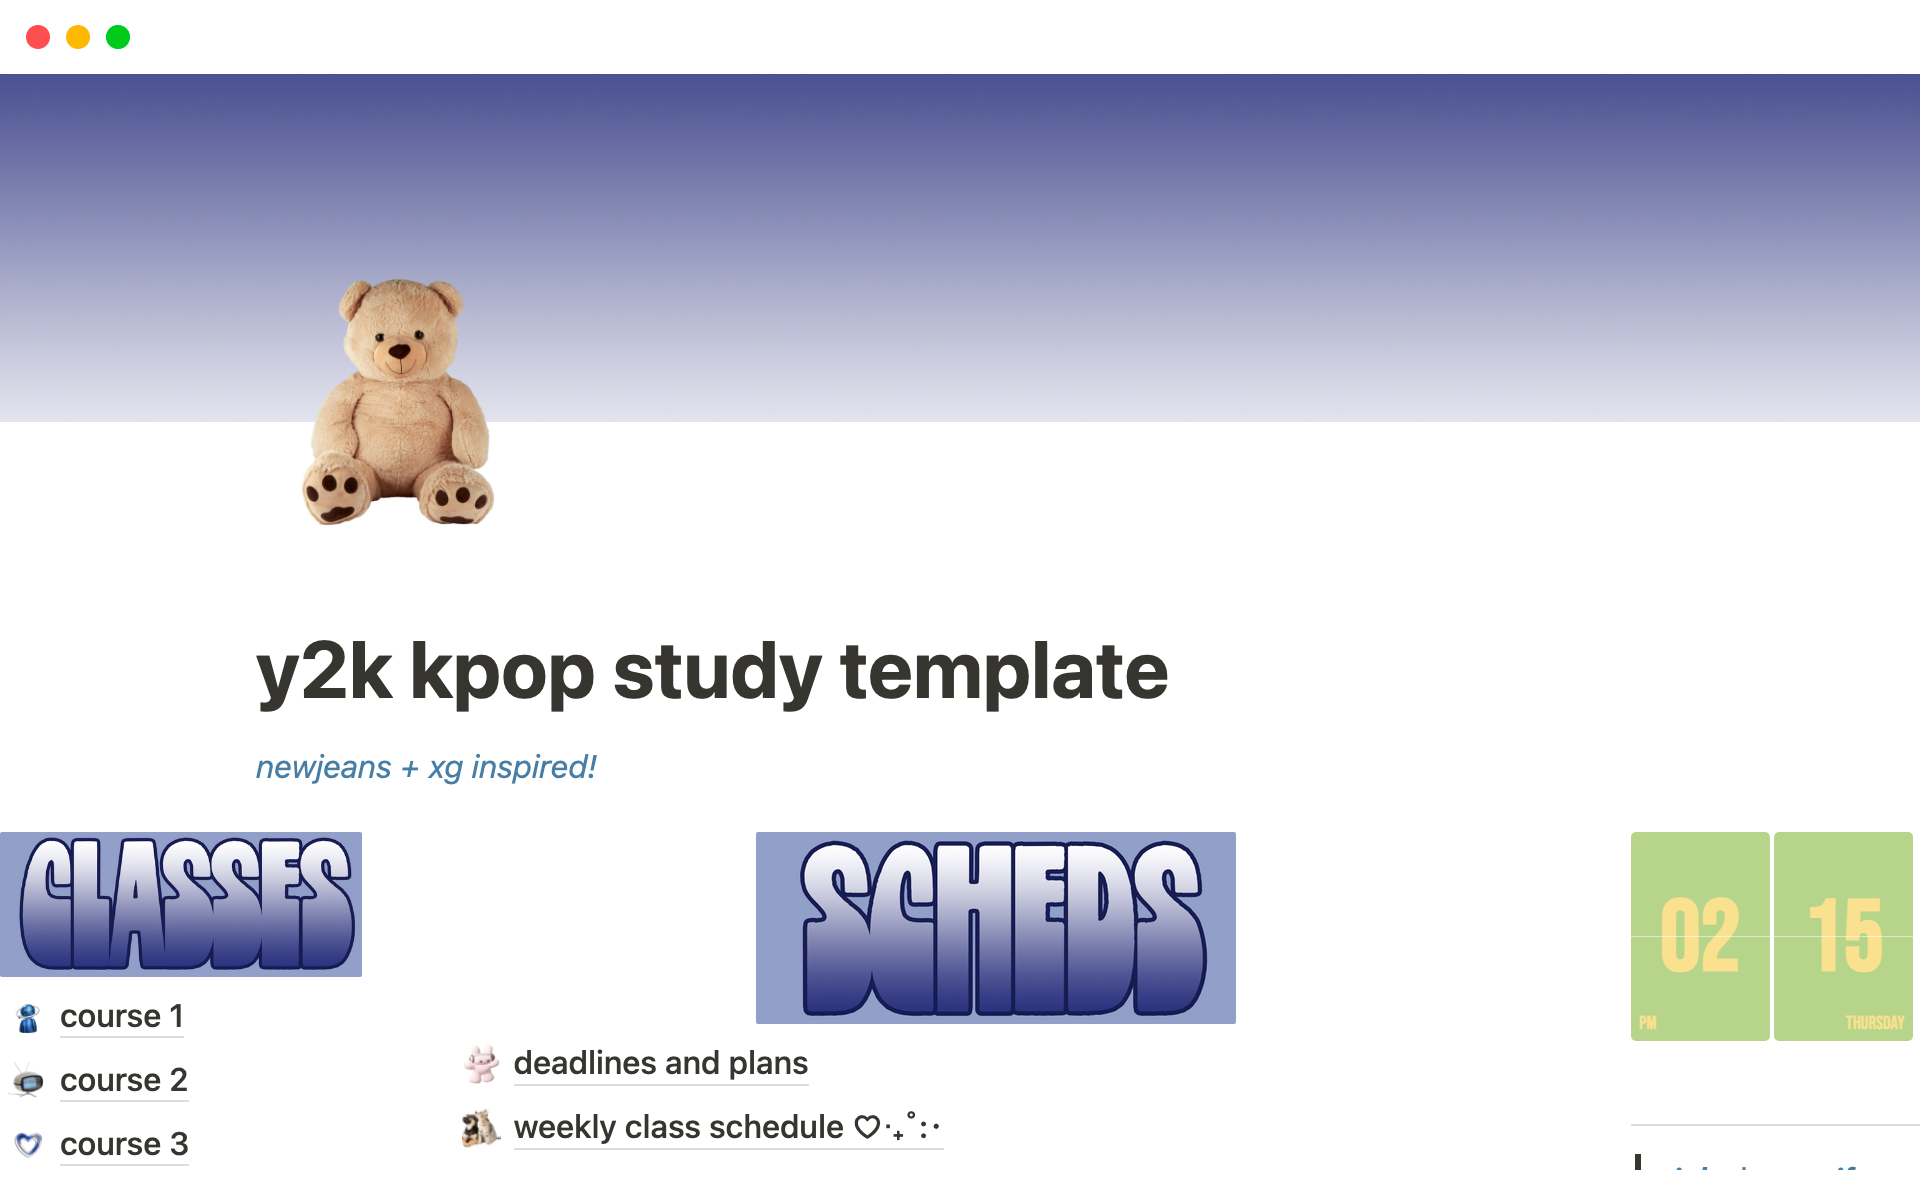 A template preview for y2k kpop study